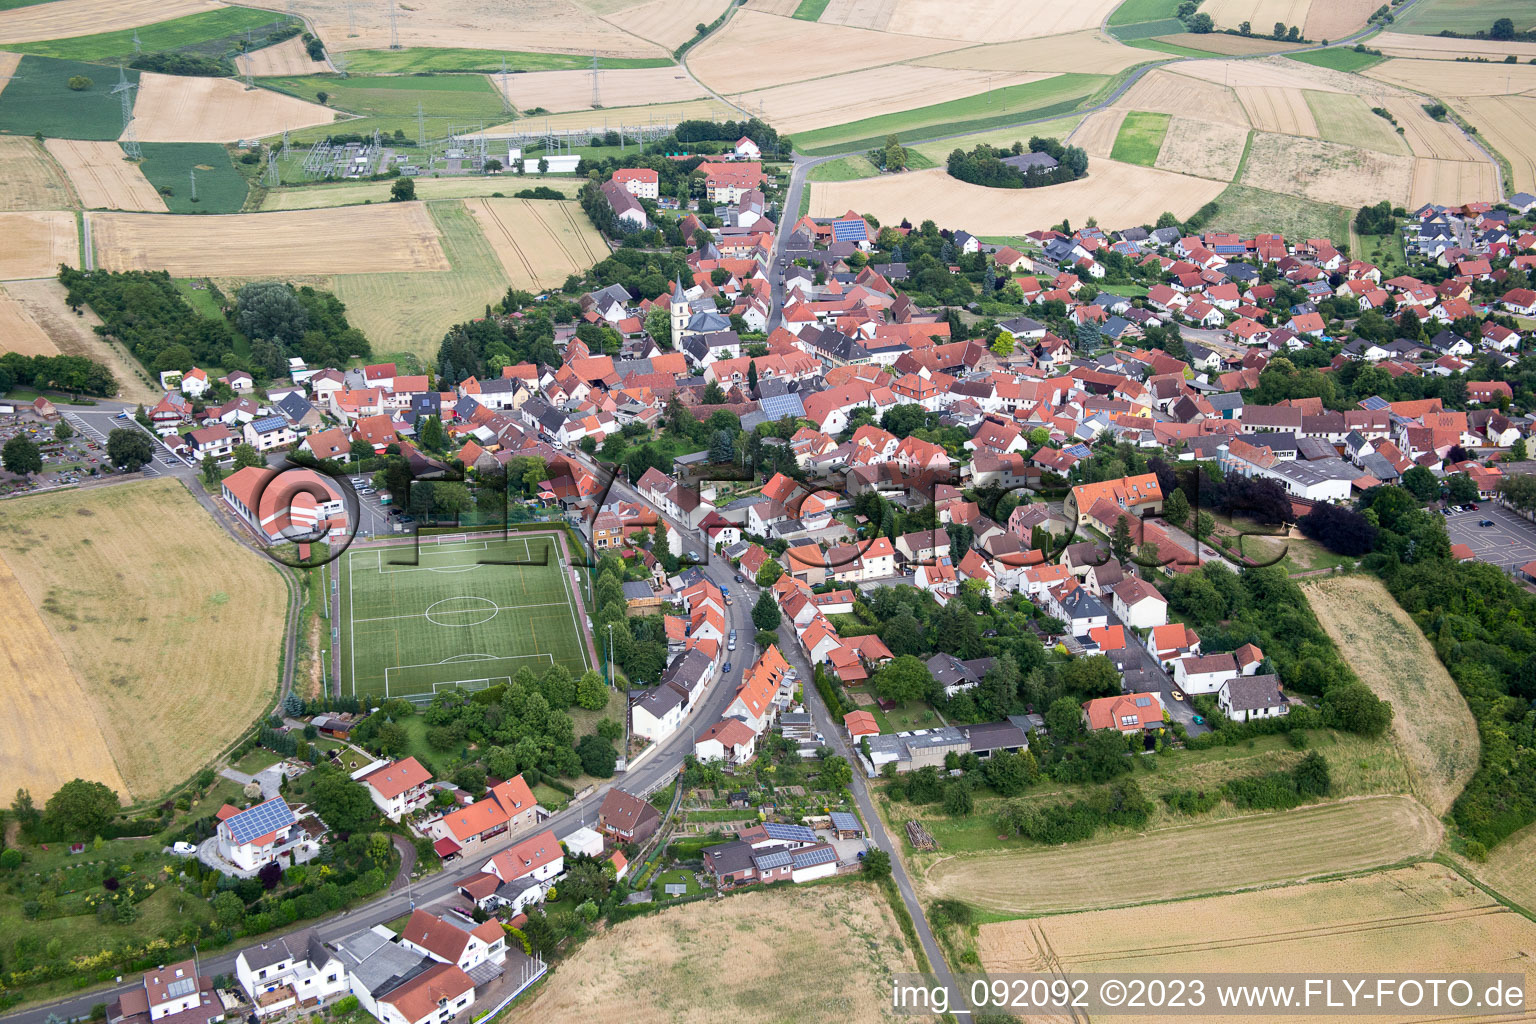 Kerzenheim in the state Rhineland-Palatinate, Germany from above